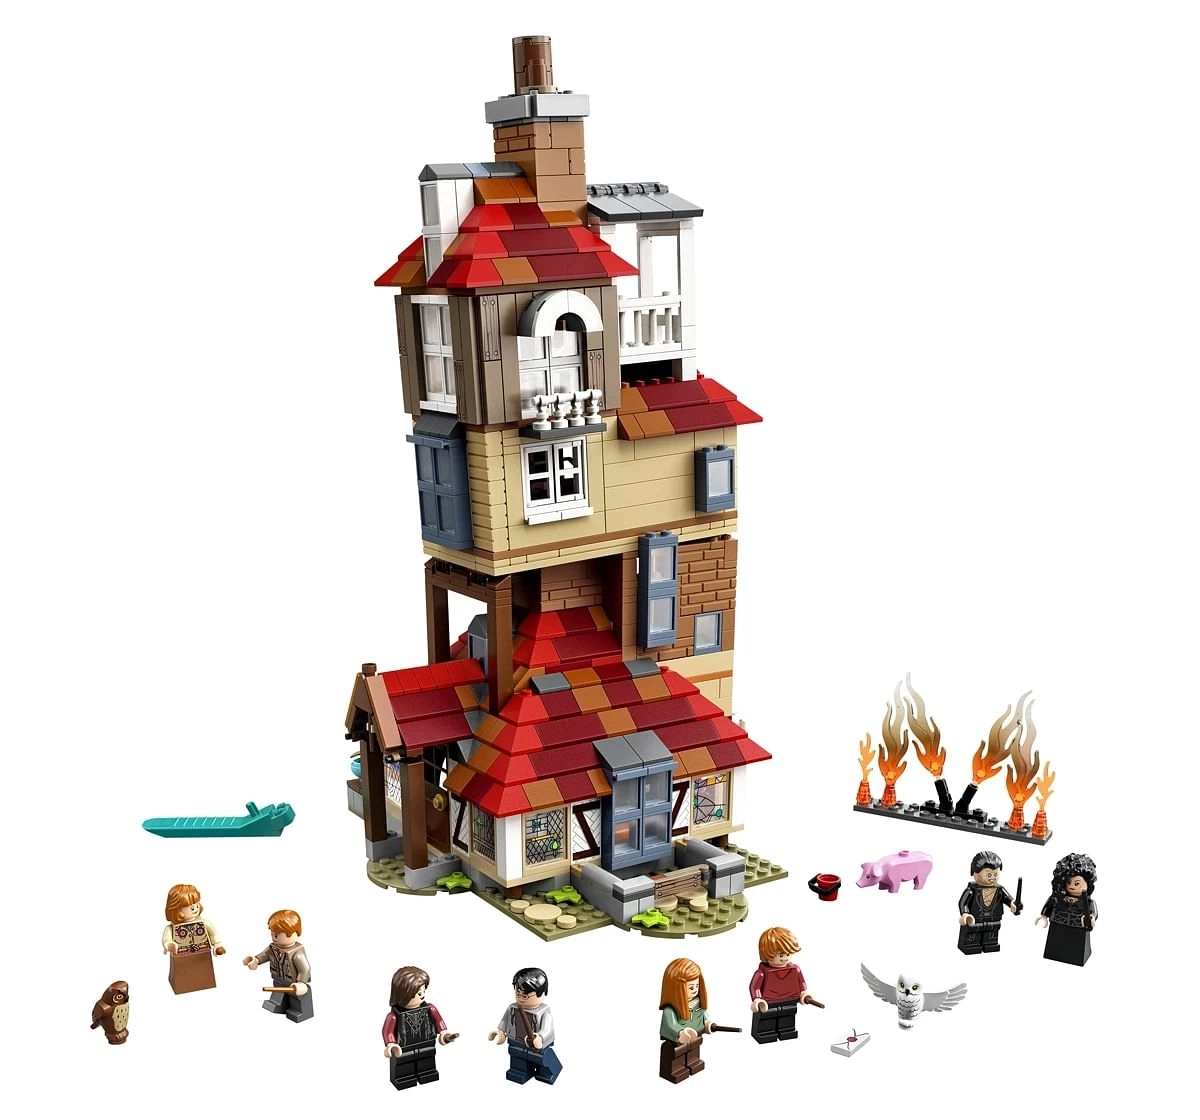 Lego Harry Potter Attack On The Burrow Building Kit (1047 Pieces)